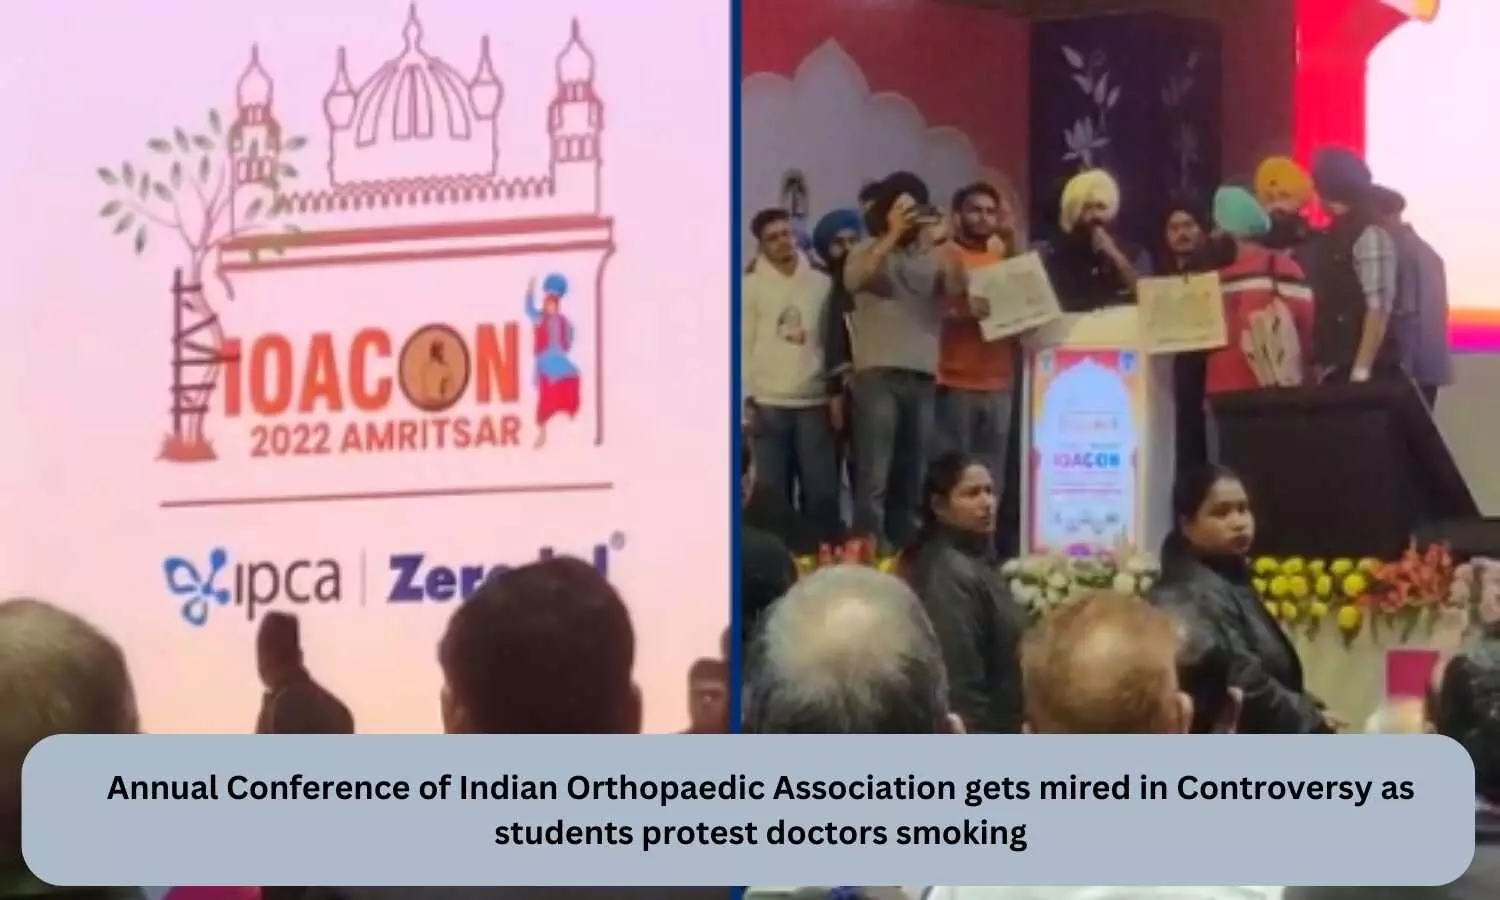 Ruckus at IOACON: Annual Conference of Indian Orthopaedic Association gets mired in Controversy as students protest doctors smoking